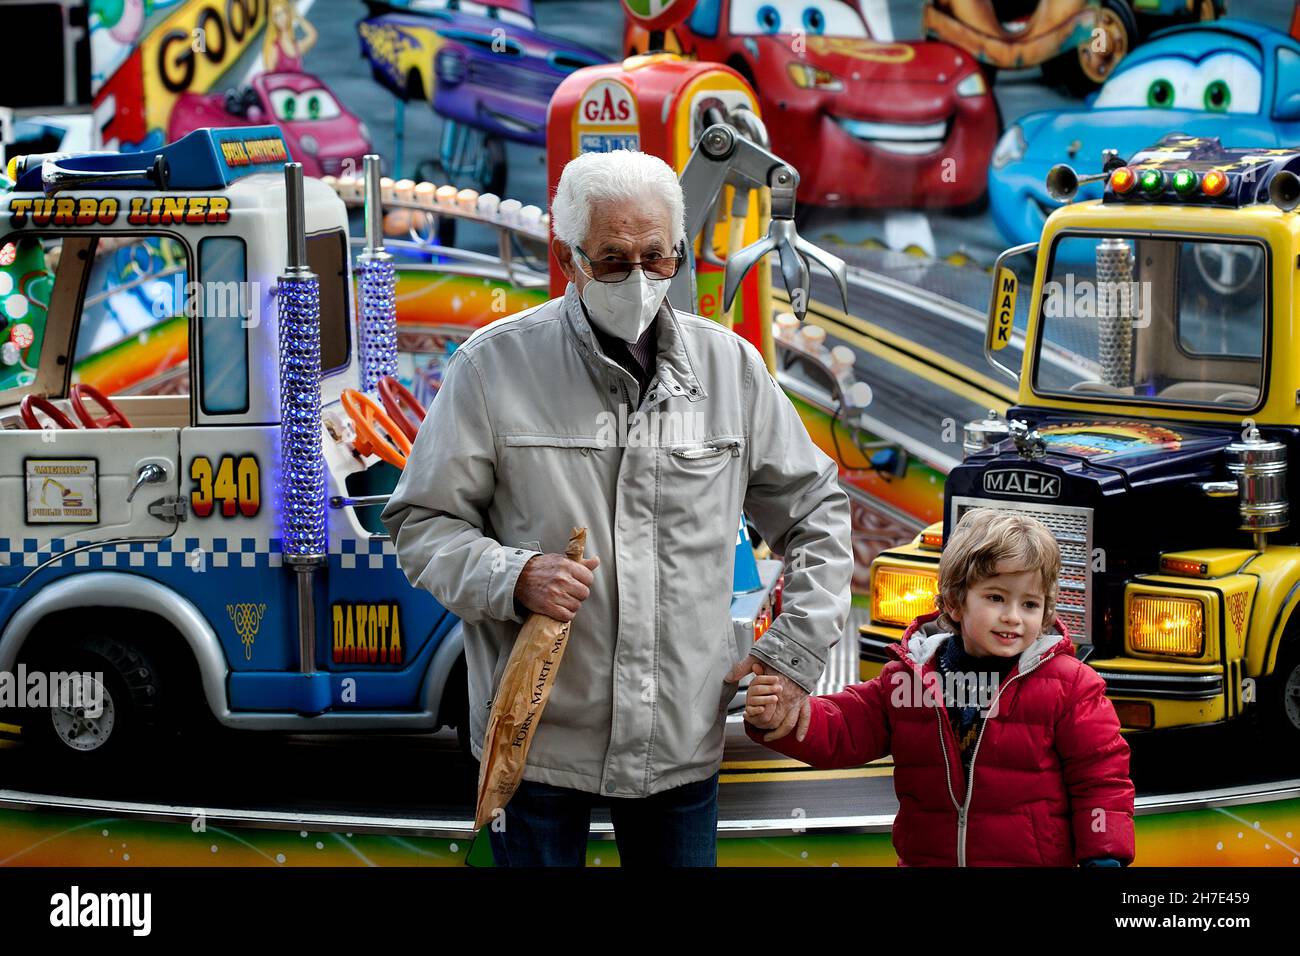 Grandfather and grandson at fair, Barcelona, Spain. Stock Photo